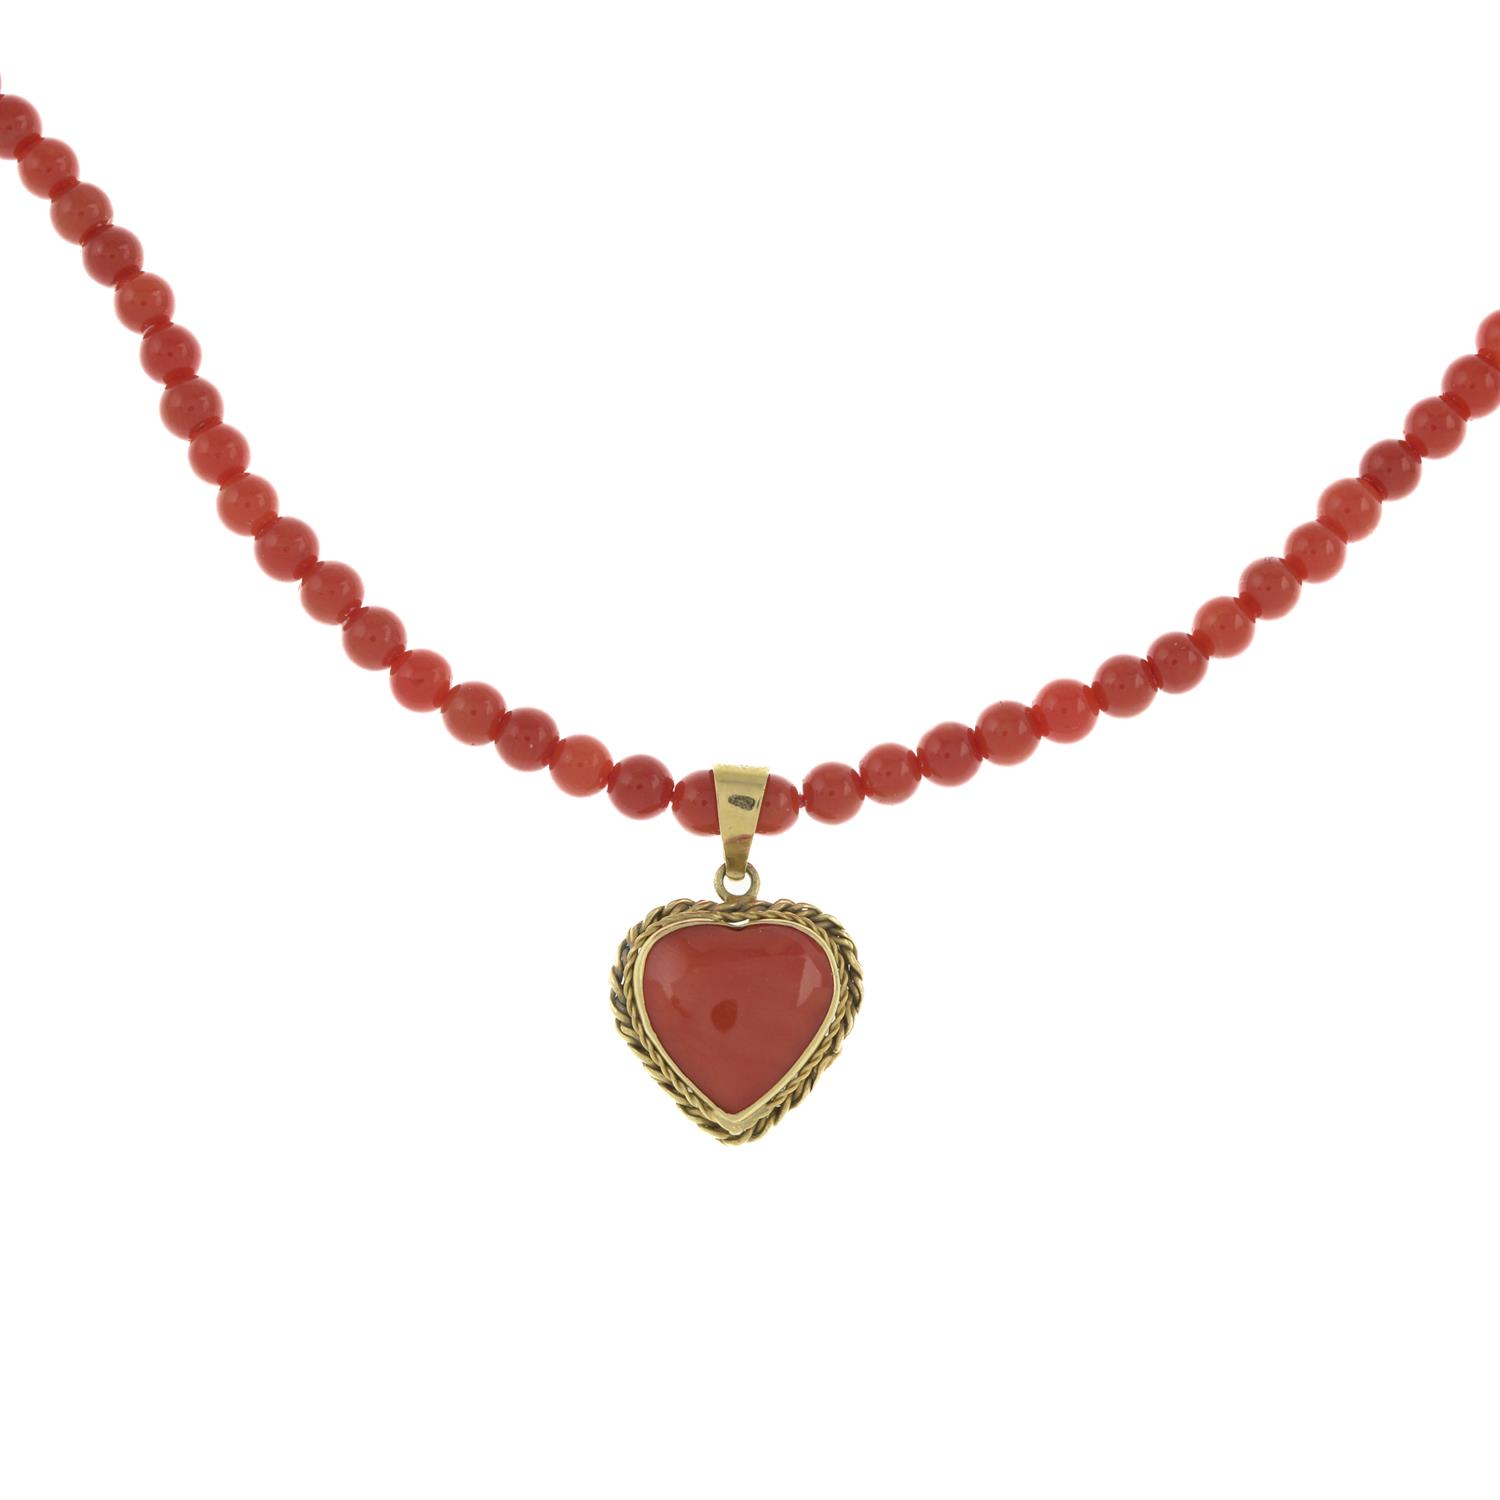 Coral single-strand bead necklace, with heart-shape coral pendant - Image 2 of 2